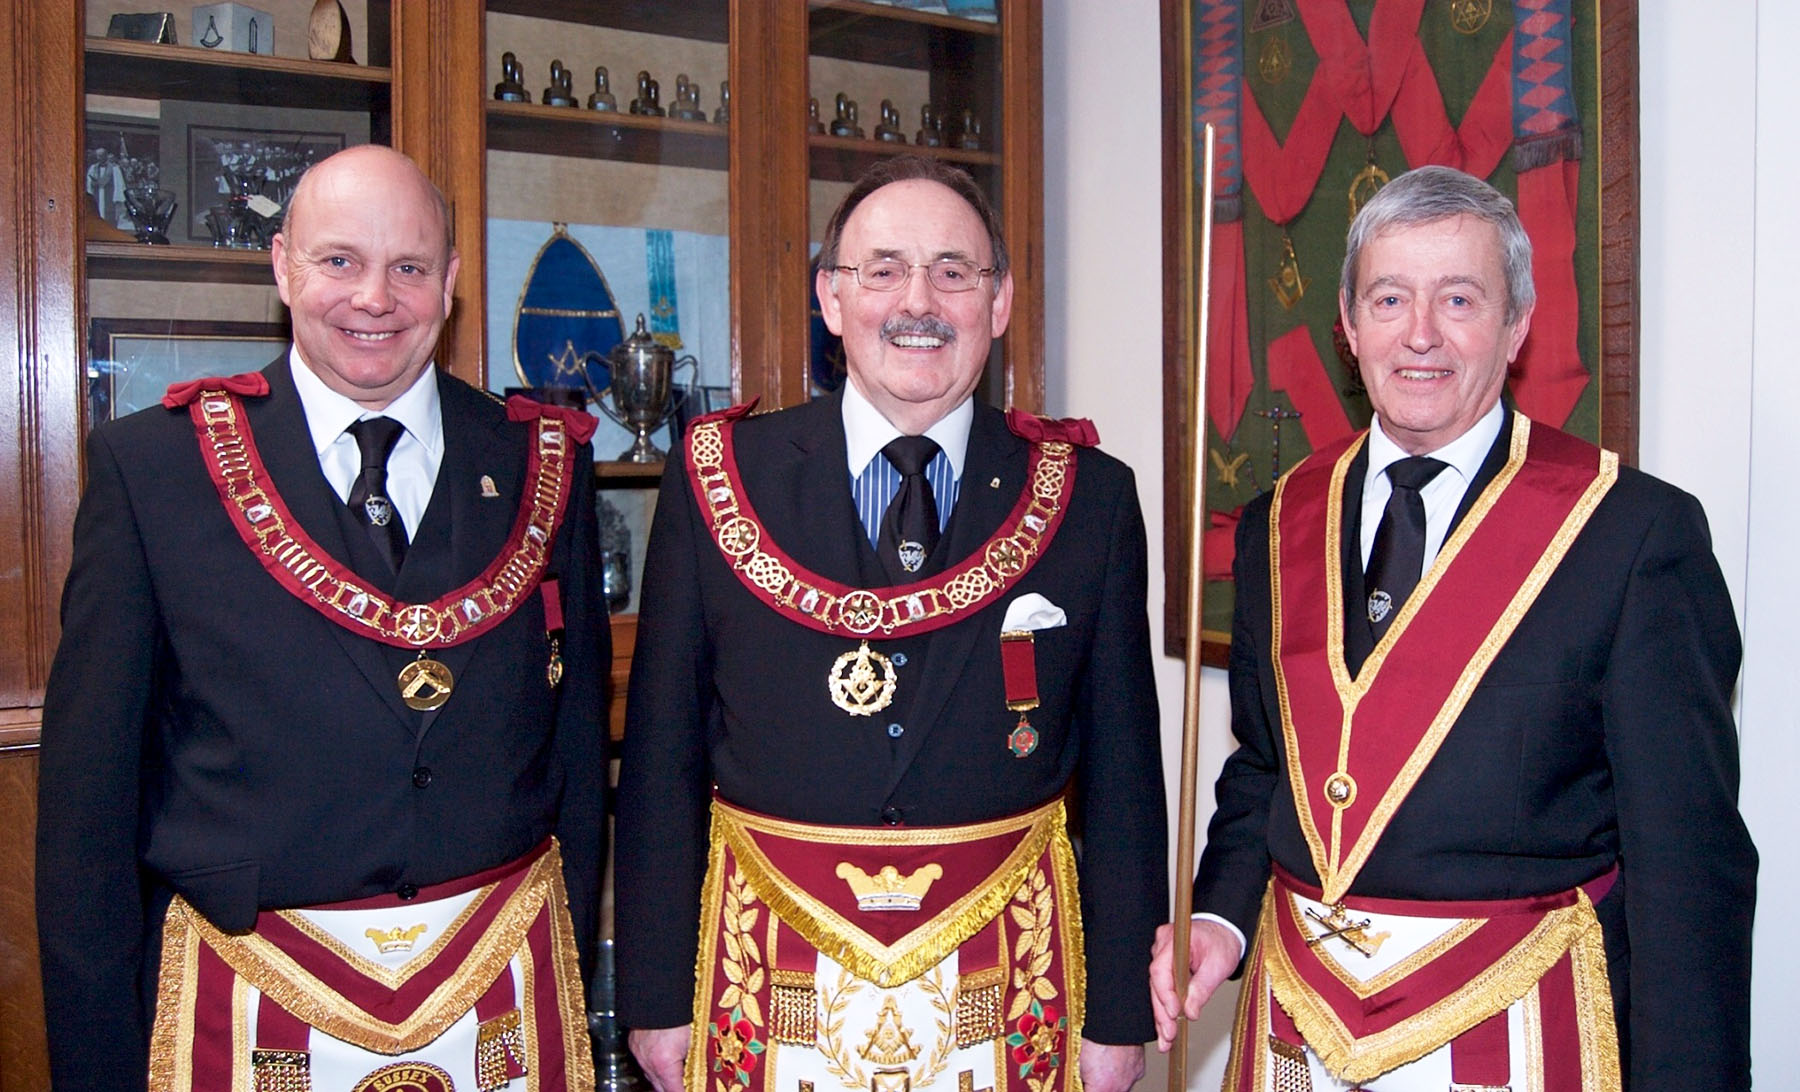 The Annual Meeting of Provincial Grand Court on Saturday 6th April 2019